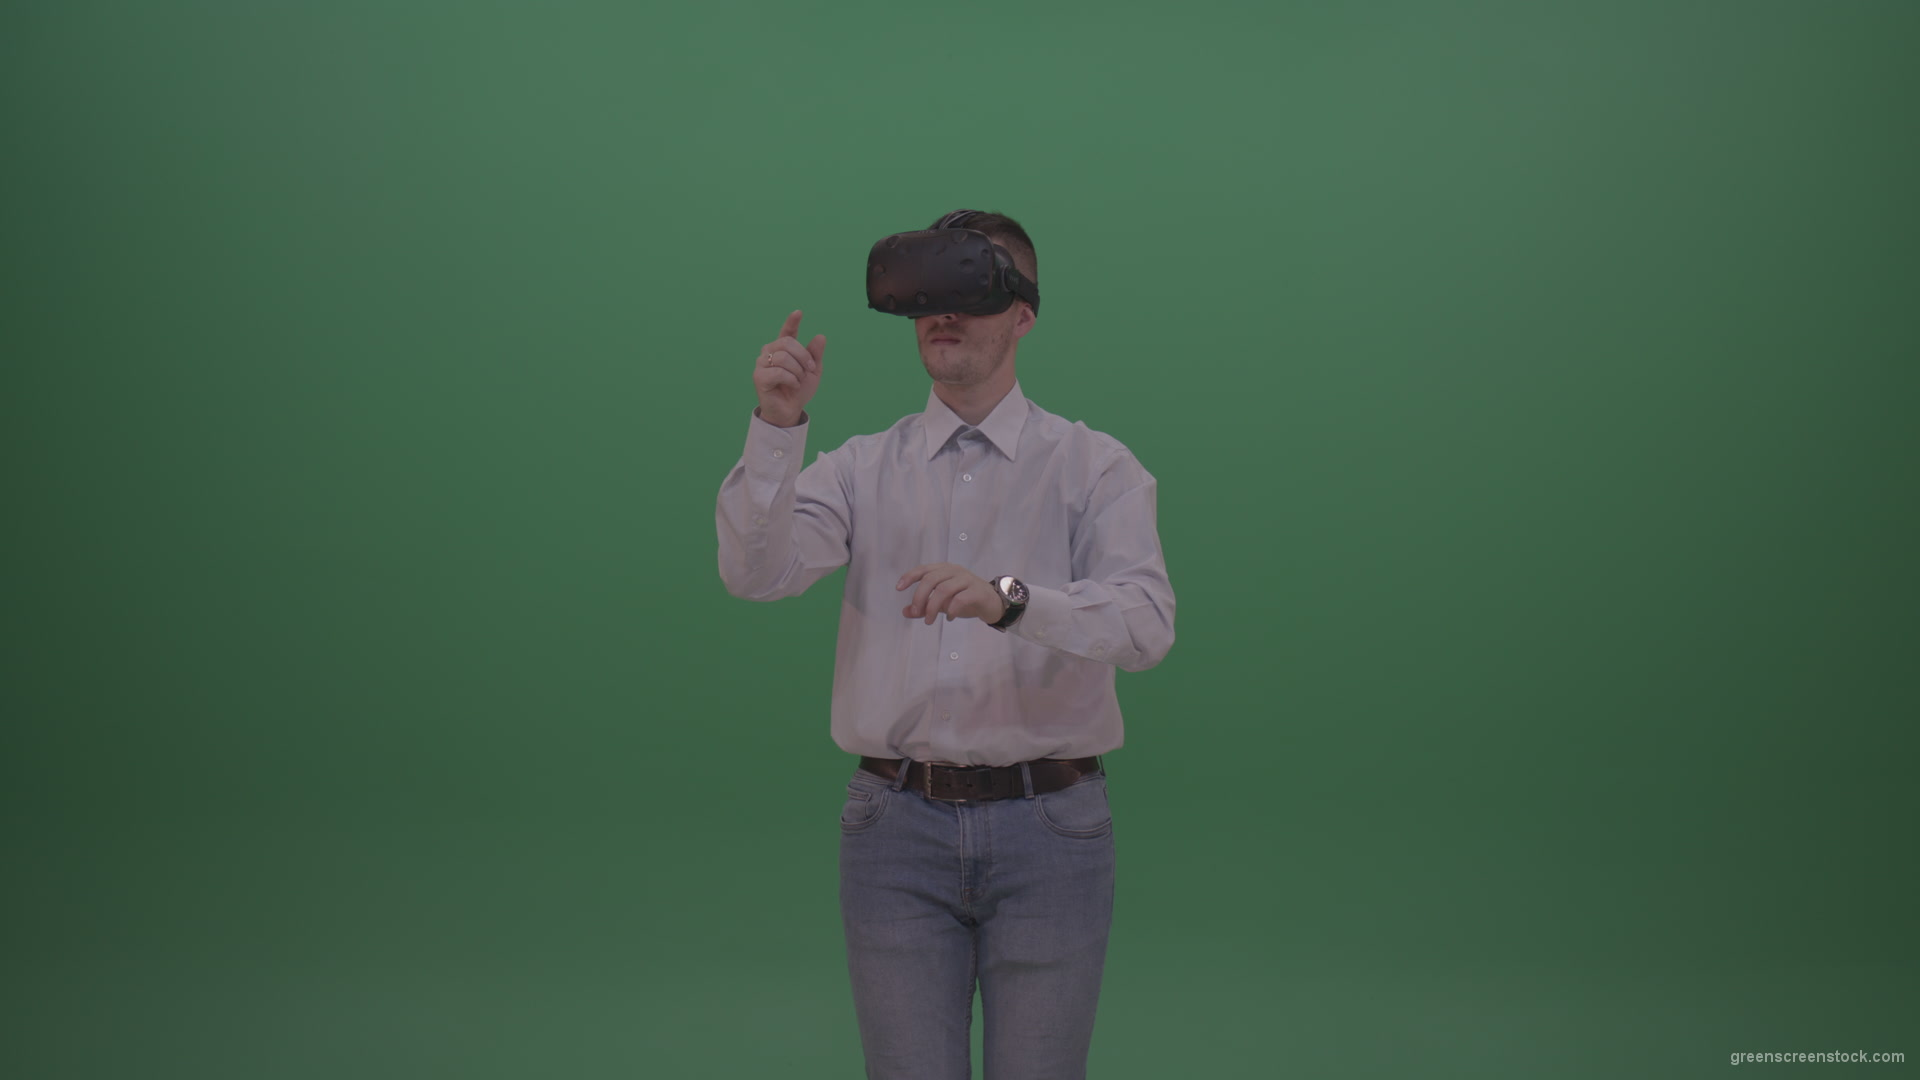 Young_Handsome_Man_With_Black_Hair_Wearing_White_Shirt_Using_Virtual_Glasses_Clicking_Touch_Pad_On_Green_Screen_Background_Wall_007 Green Screen Stock